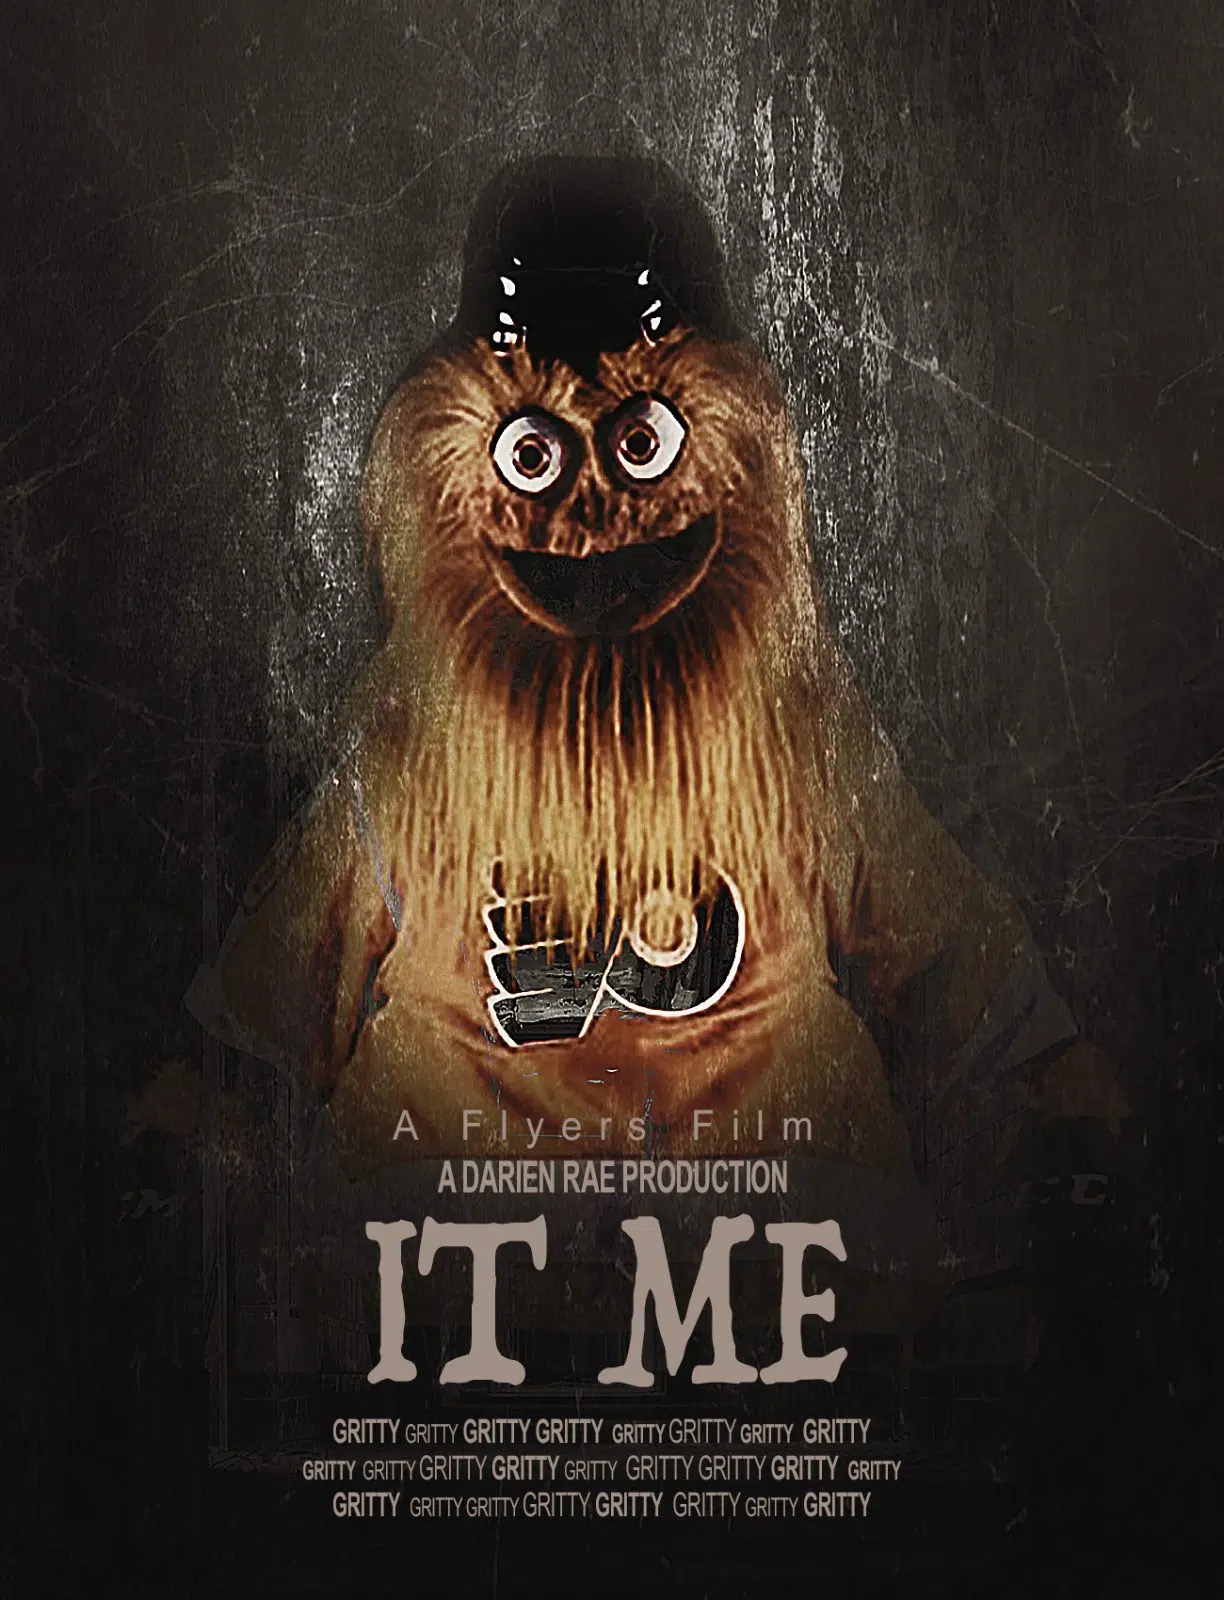 People are making creepy photoshopped images of Gritty